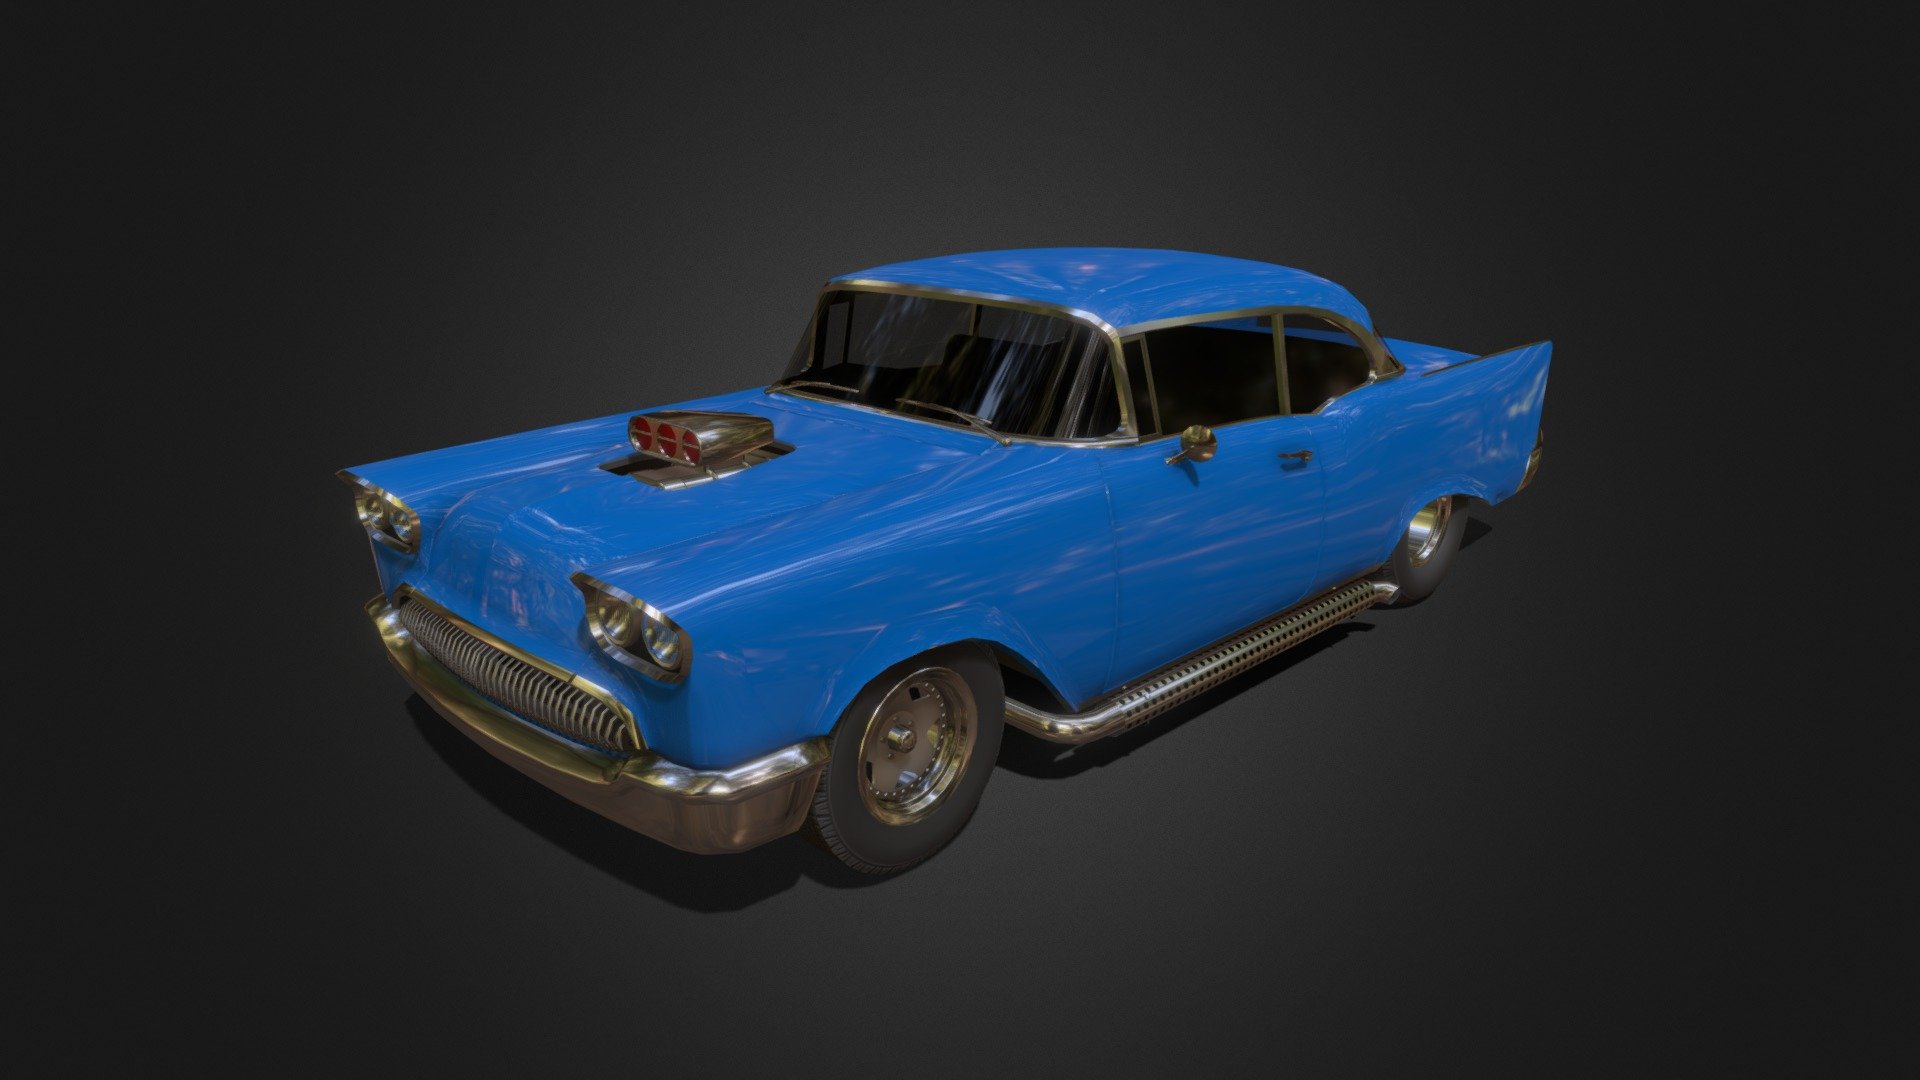 Game-ready vehicle model with Textures, 4 LOD states, and simplified collision meshes.

Vehicle model is based on 1950s car designs with classic muscle car tyres 3d model